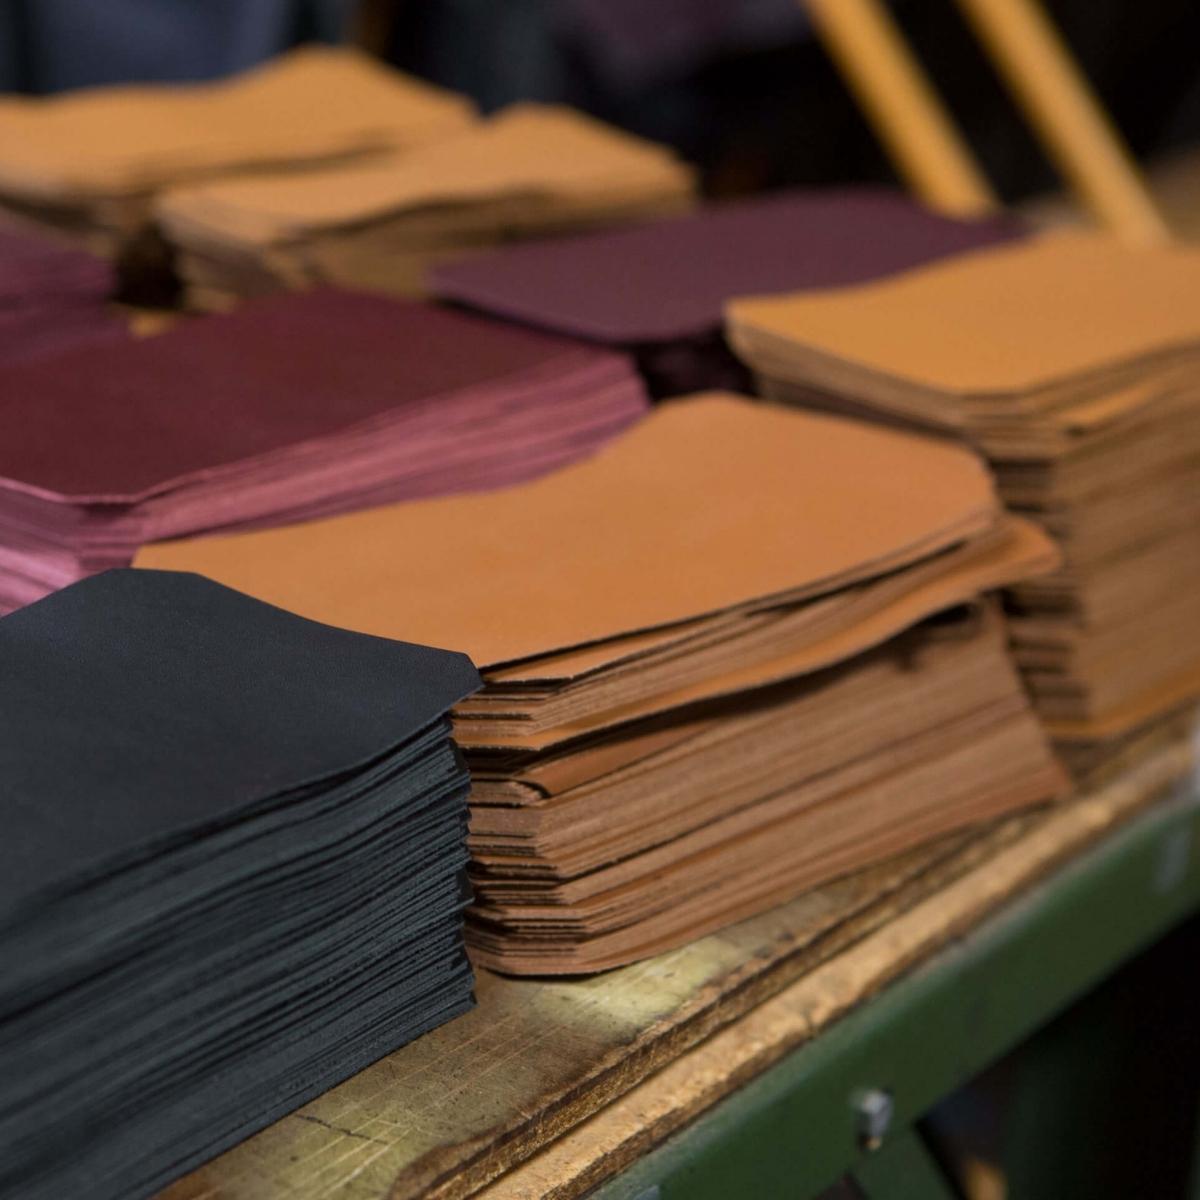 Sheets of Nappa leather used in wallet production stacked on a work table.